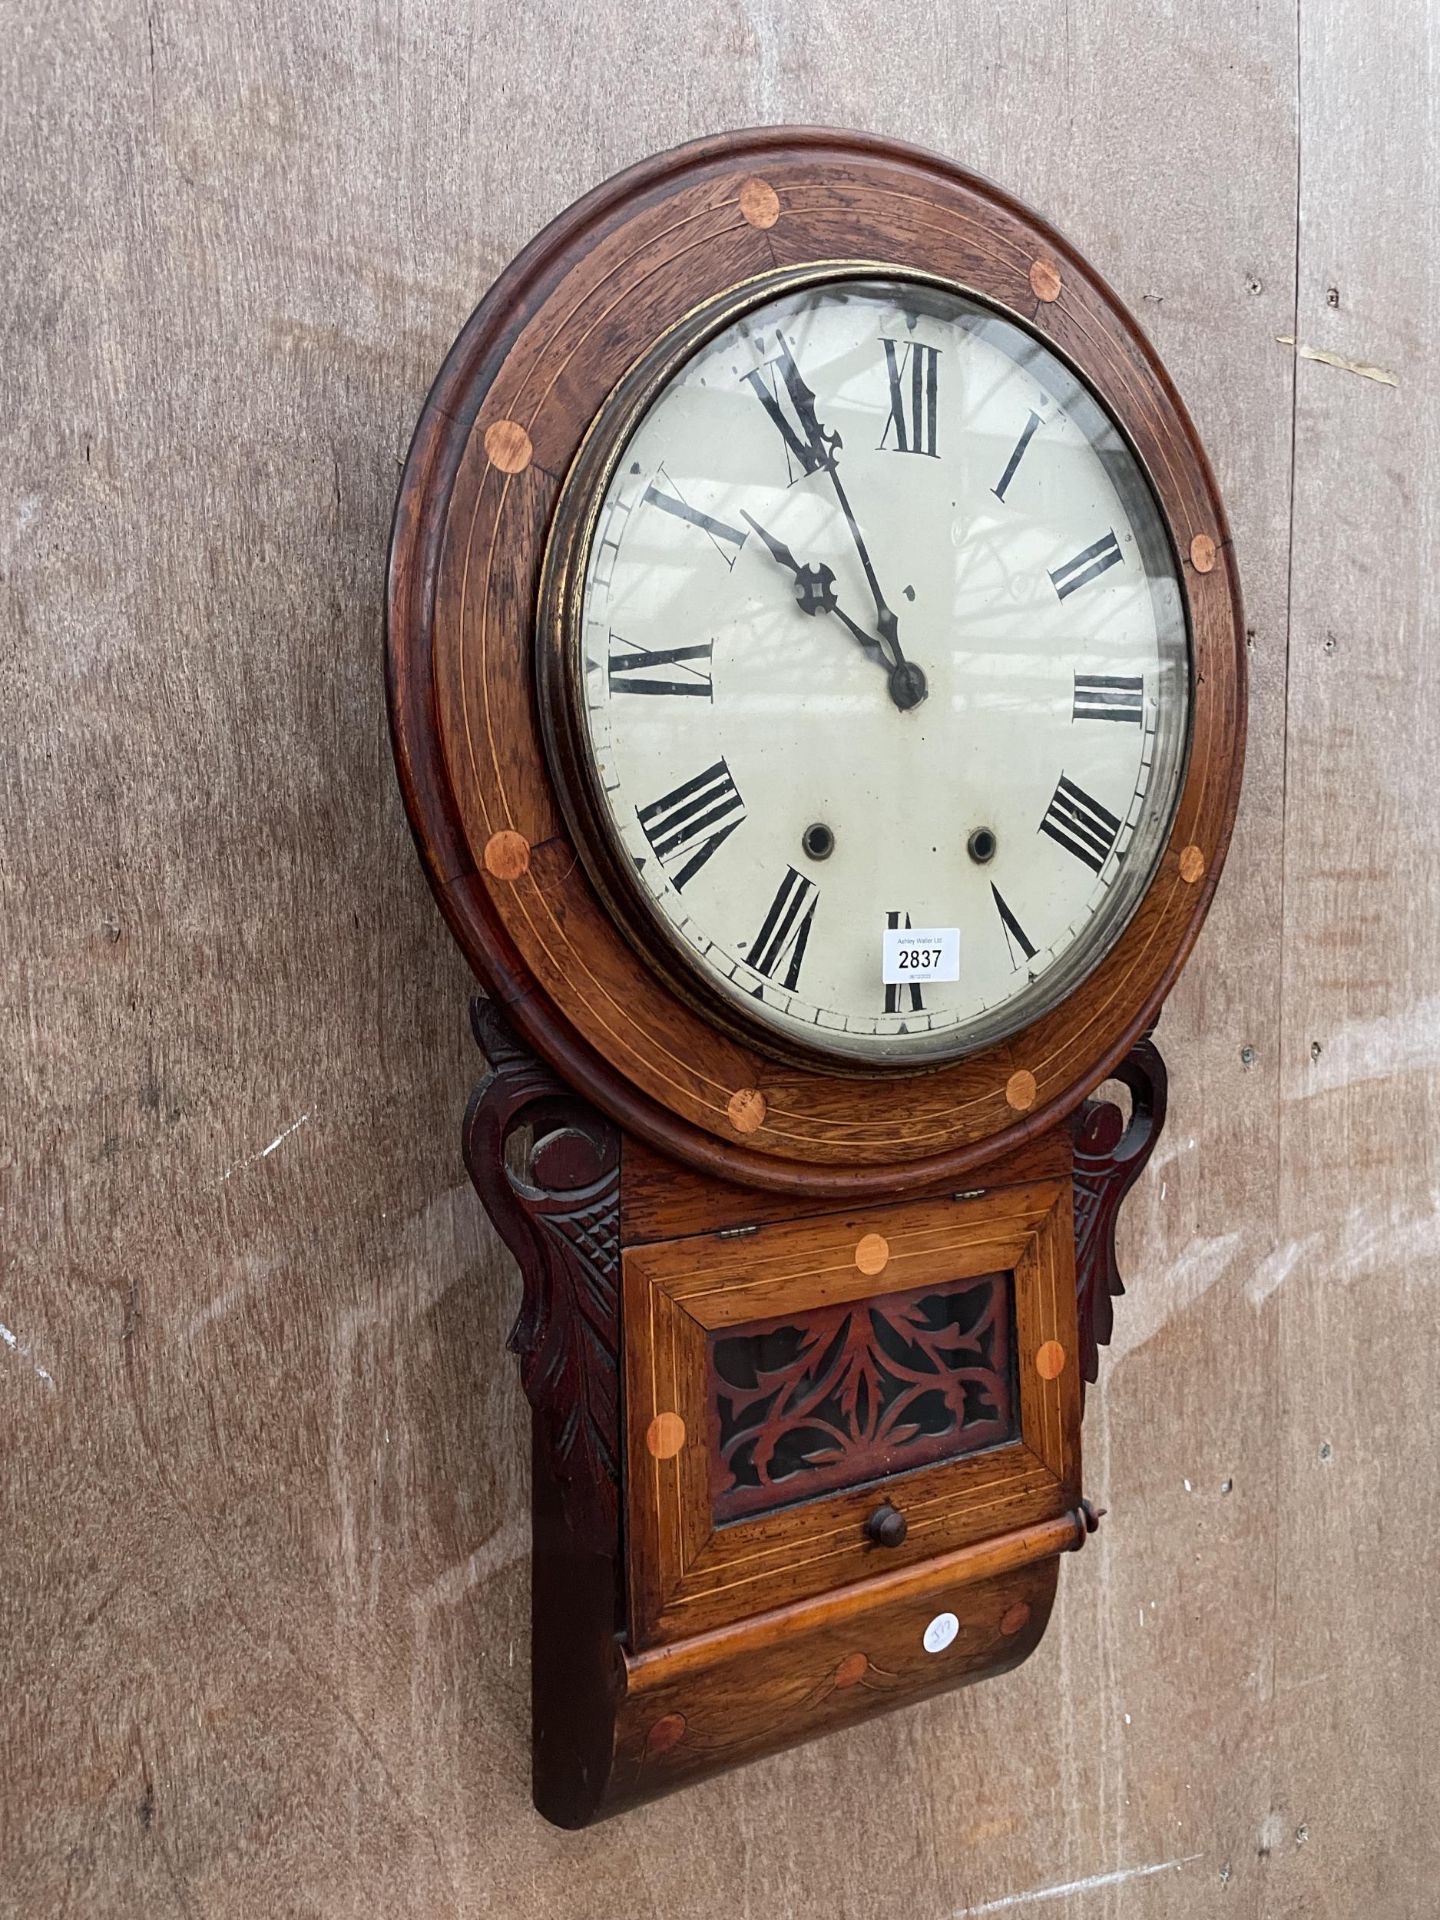 A VICTORIAN EIGHT-DAY WALL CLOCK WITH ENAMEL DIAL AND ROMAN NUMERALS